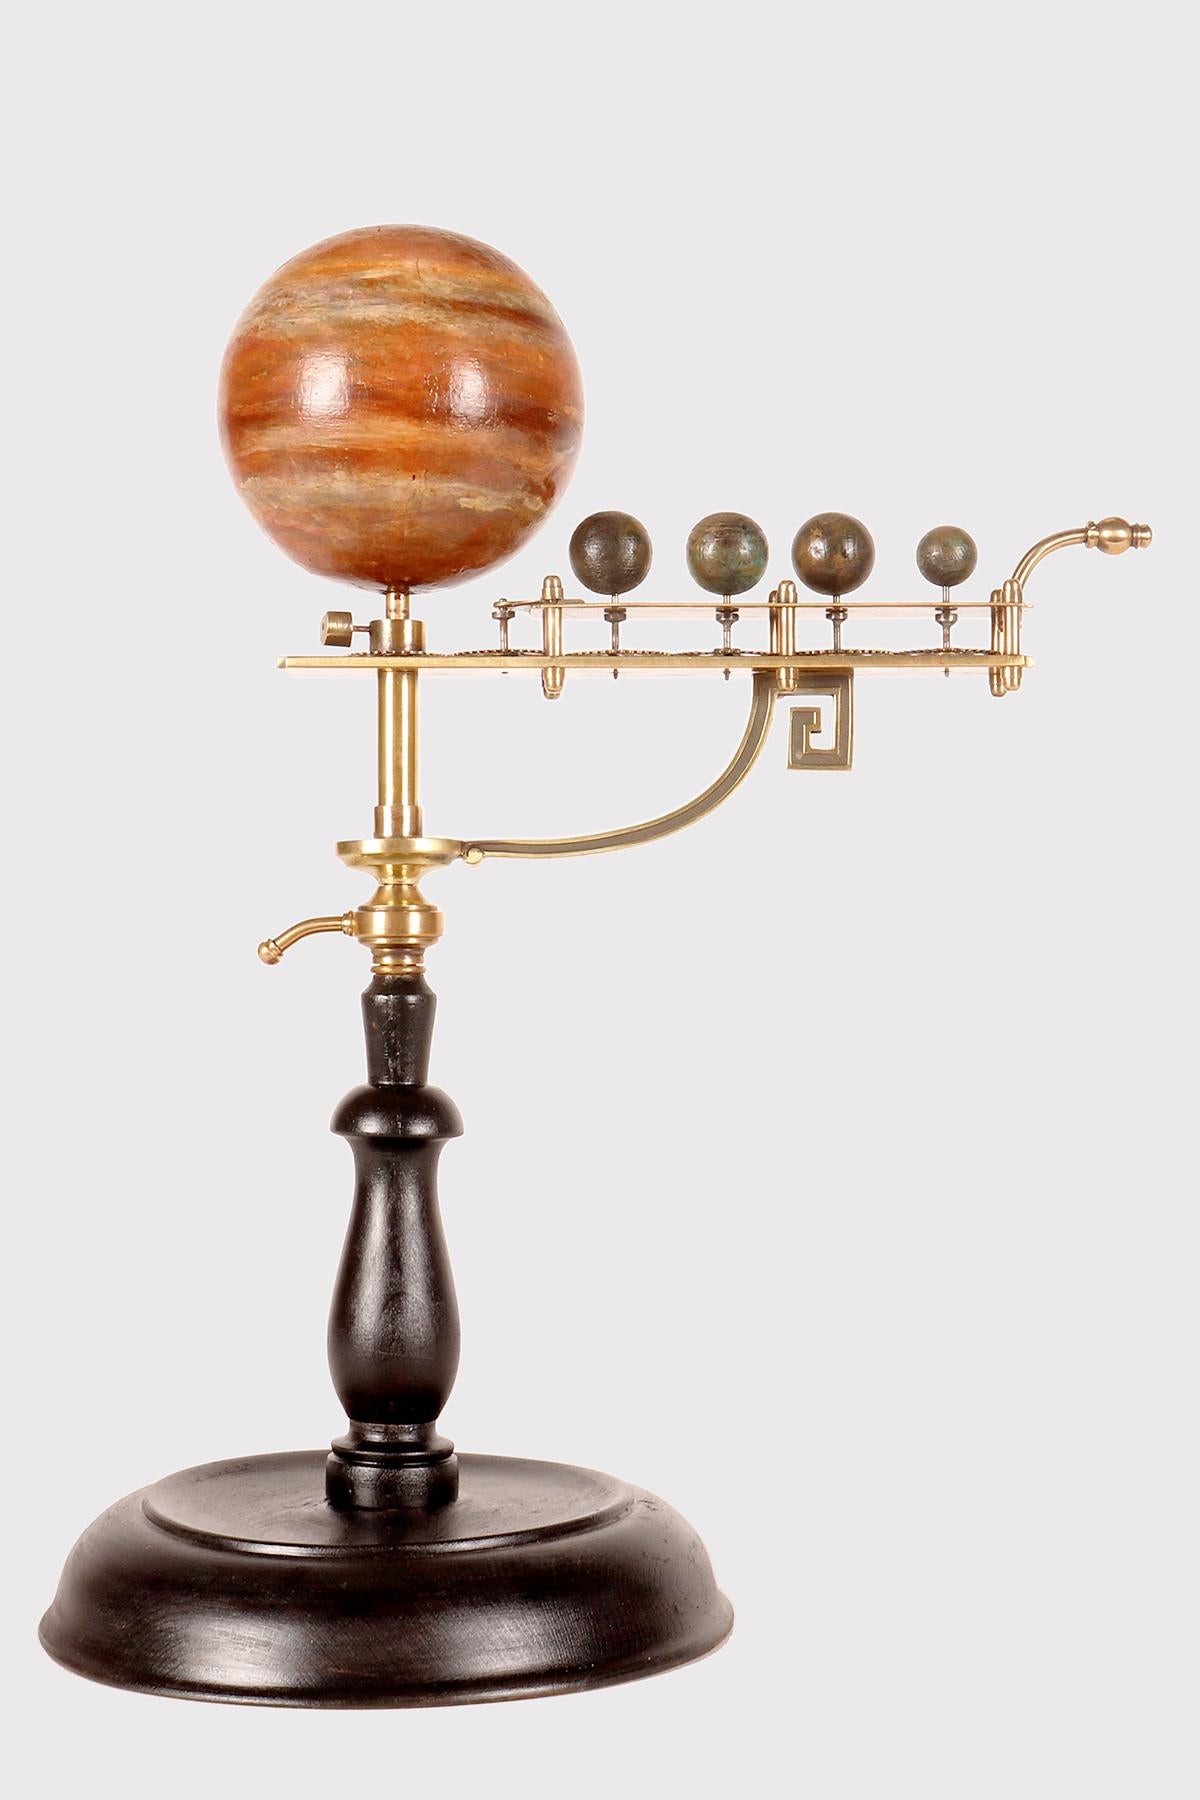 This rare paradoxical planetarium demonstrates the rotation and revolution motion of the system of the planet Jupiter and the Medici satellites. The base is made of ebonized fruit wood, circular in shape with a profile that narrows upwards, marked